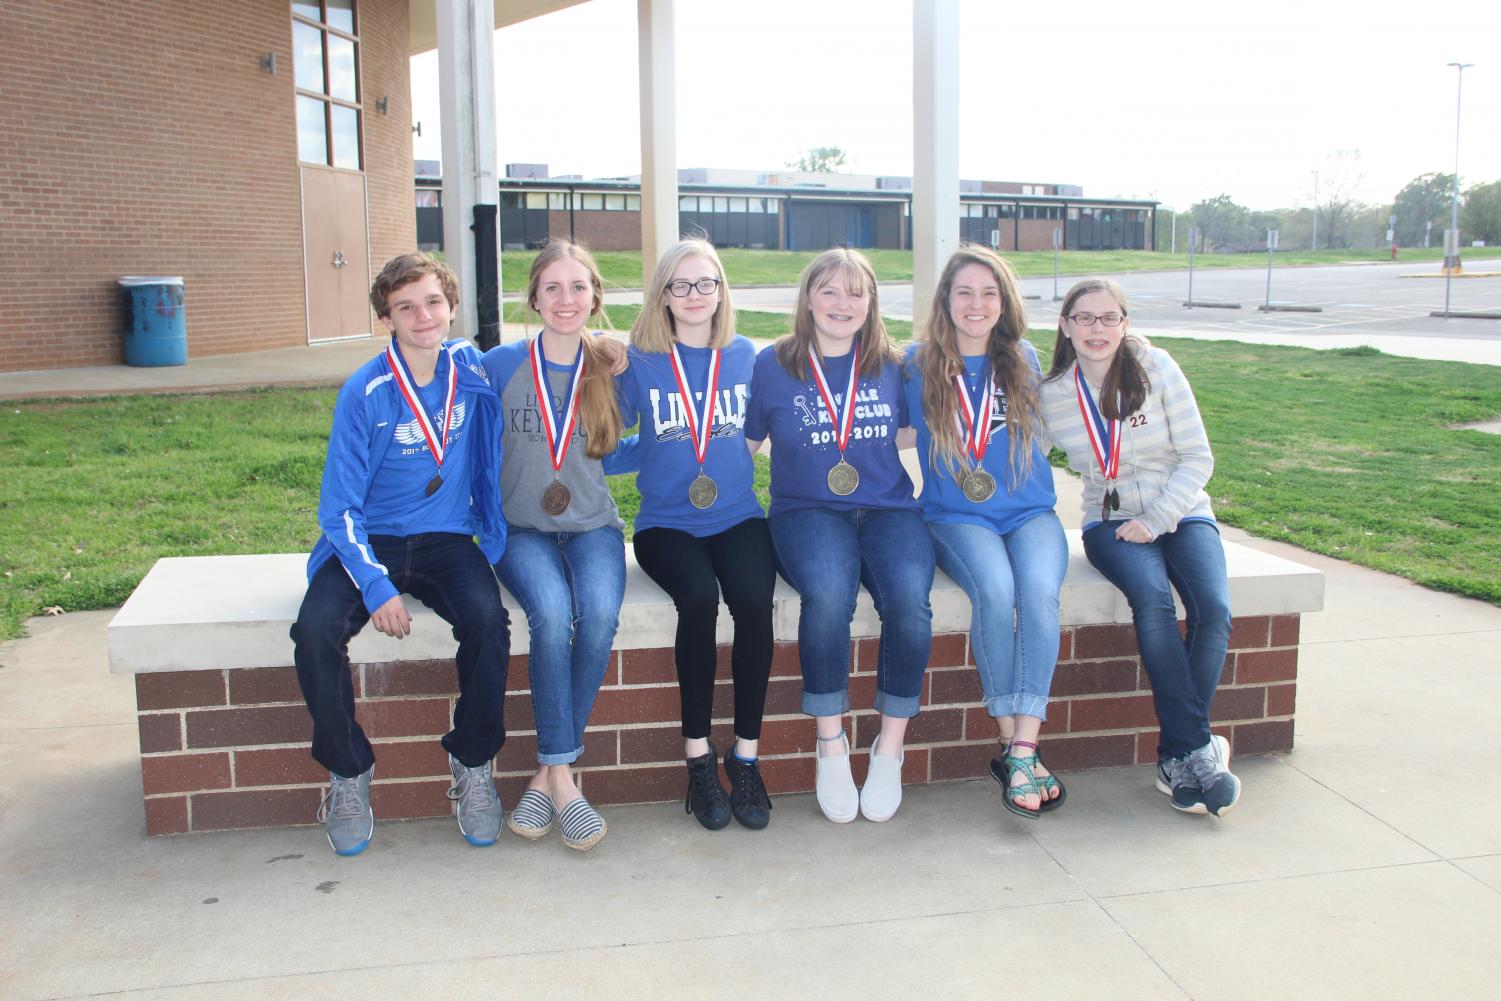 The UIL journalism team pose for a picture at the district meet. (Not pictured Tyra Rodden).